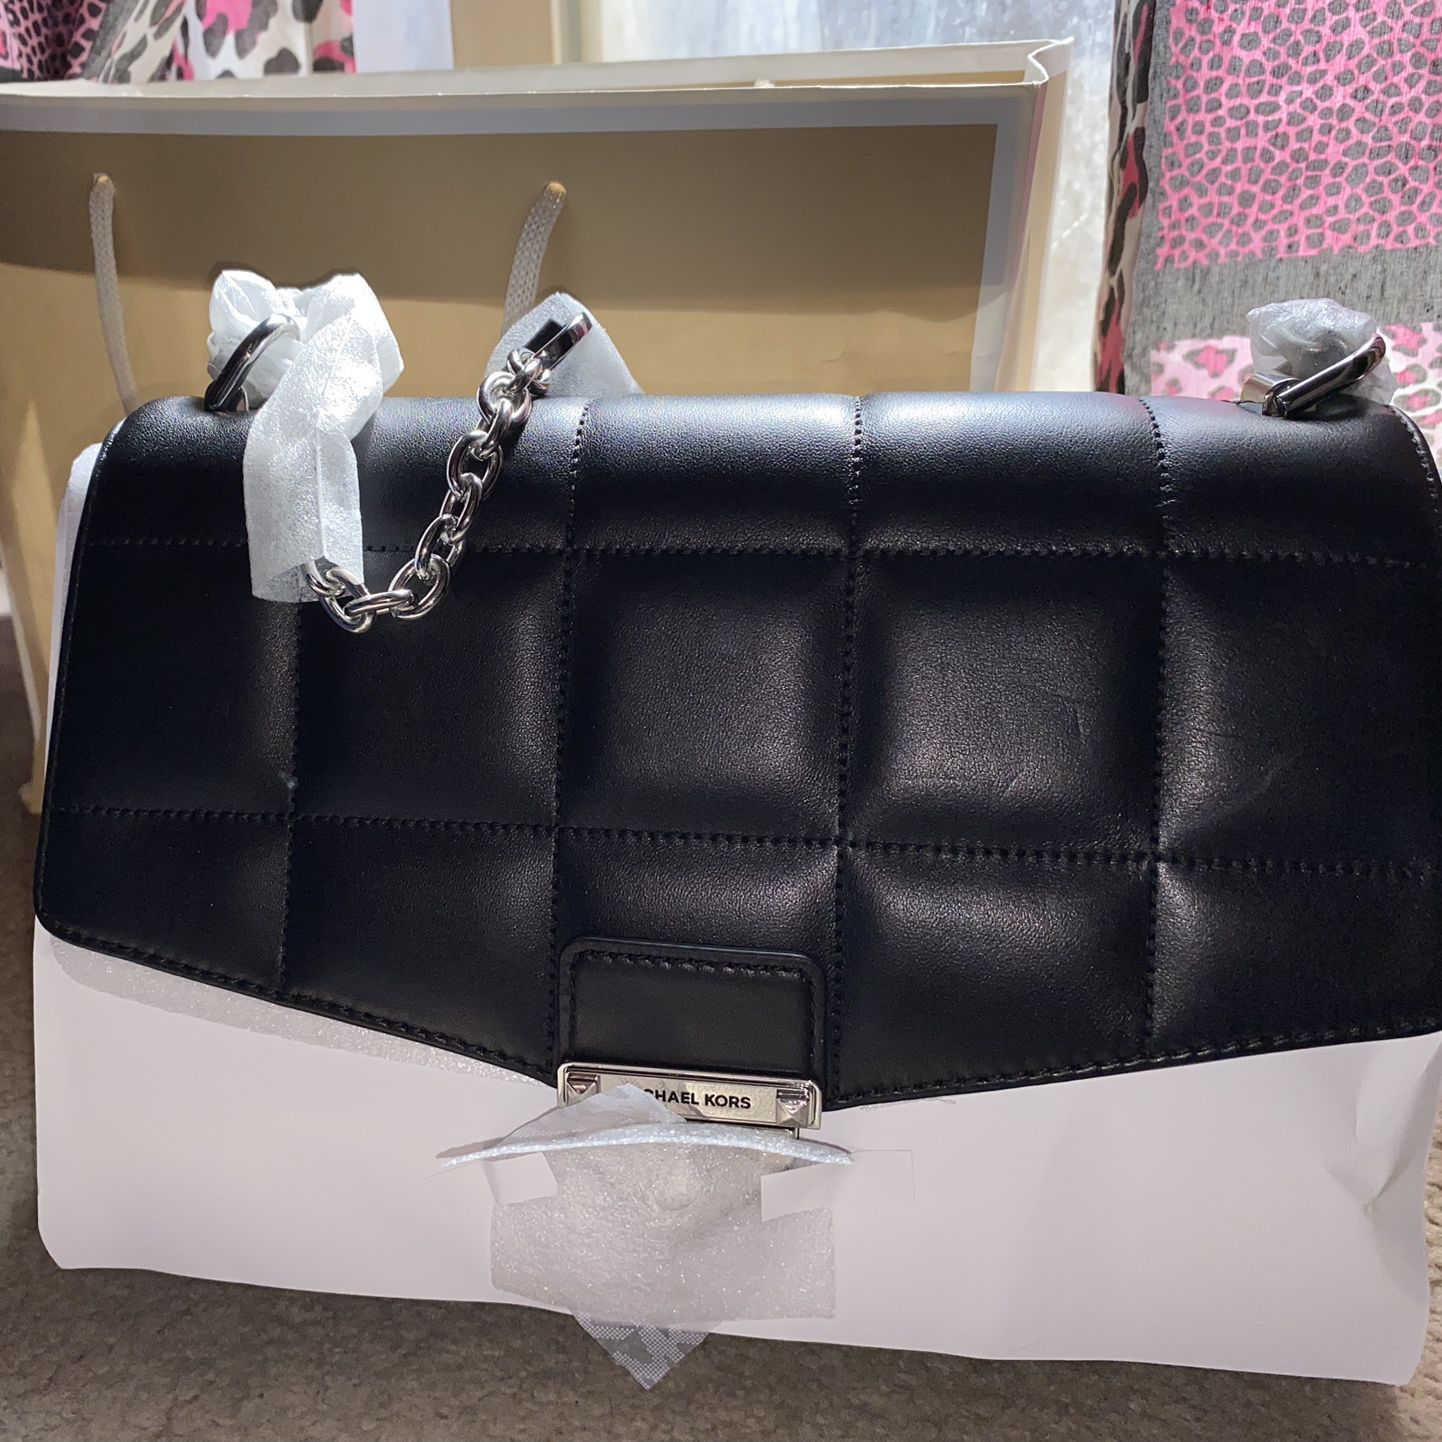 Michael Kors Purse for Sale in Albuquerque, NM - OfferUp